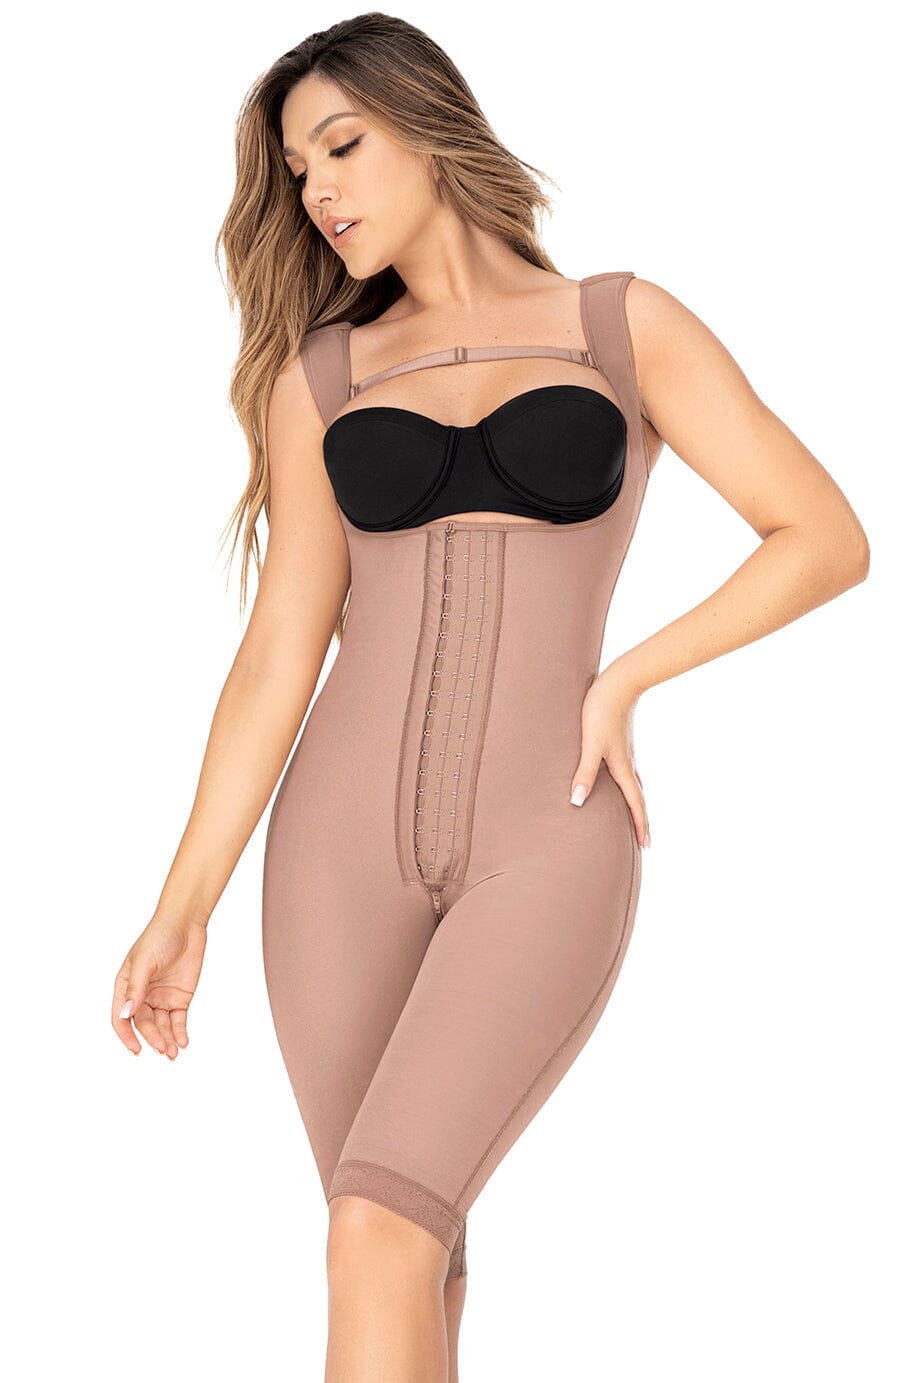 BRALESS FULL BODY ABOVE THE KNEE FAJA WITH SLEEVES AND HOOK CLOSURE